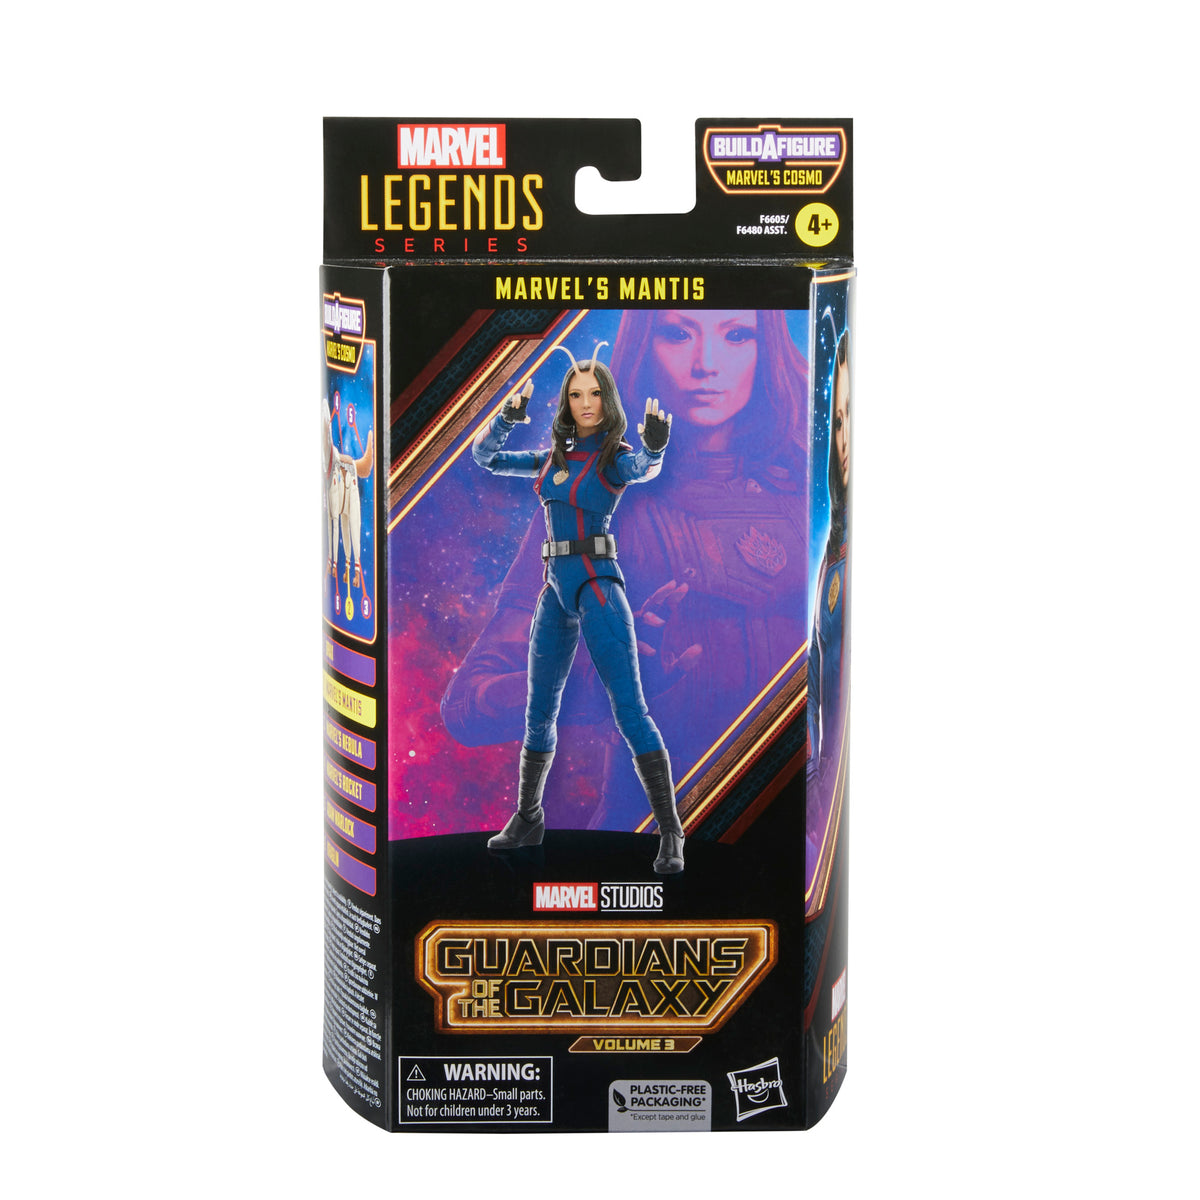 Marvel Legends (Mantis Wave): Star-Lord by Hasbro